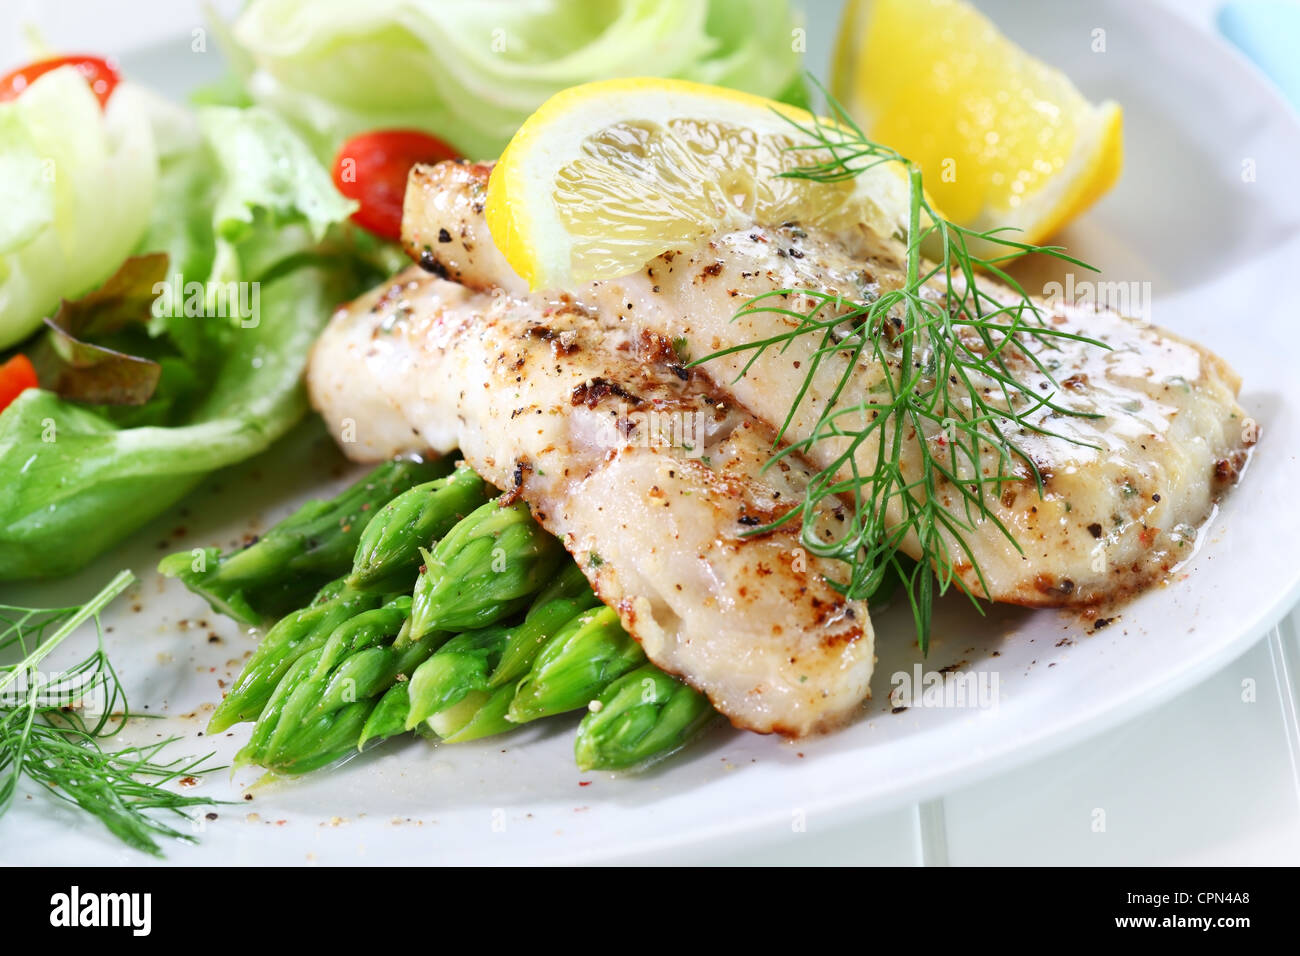 Delicious fried fish on green asparagus with salad Stock Photo